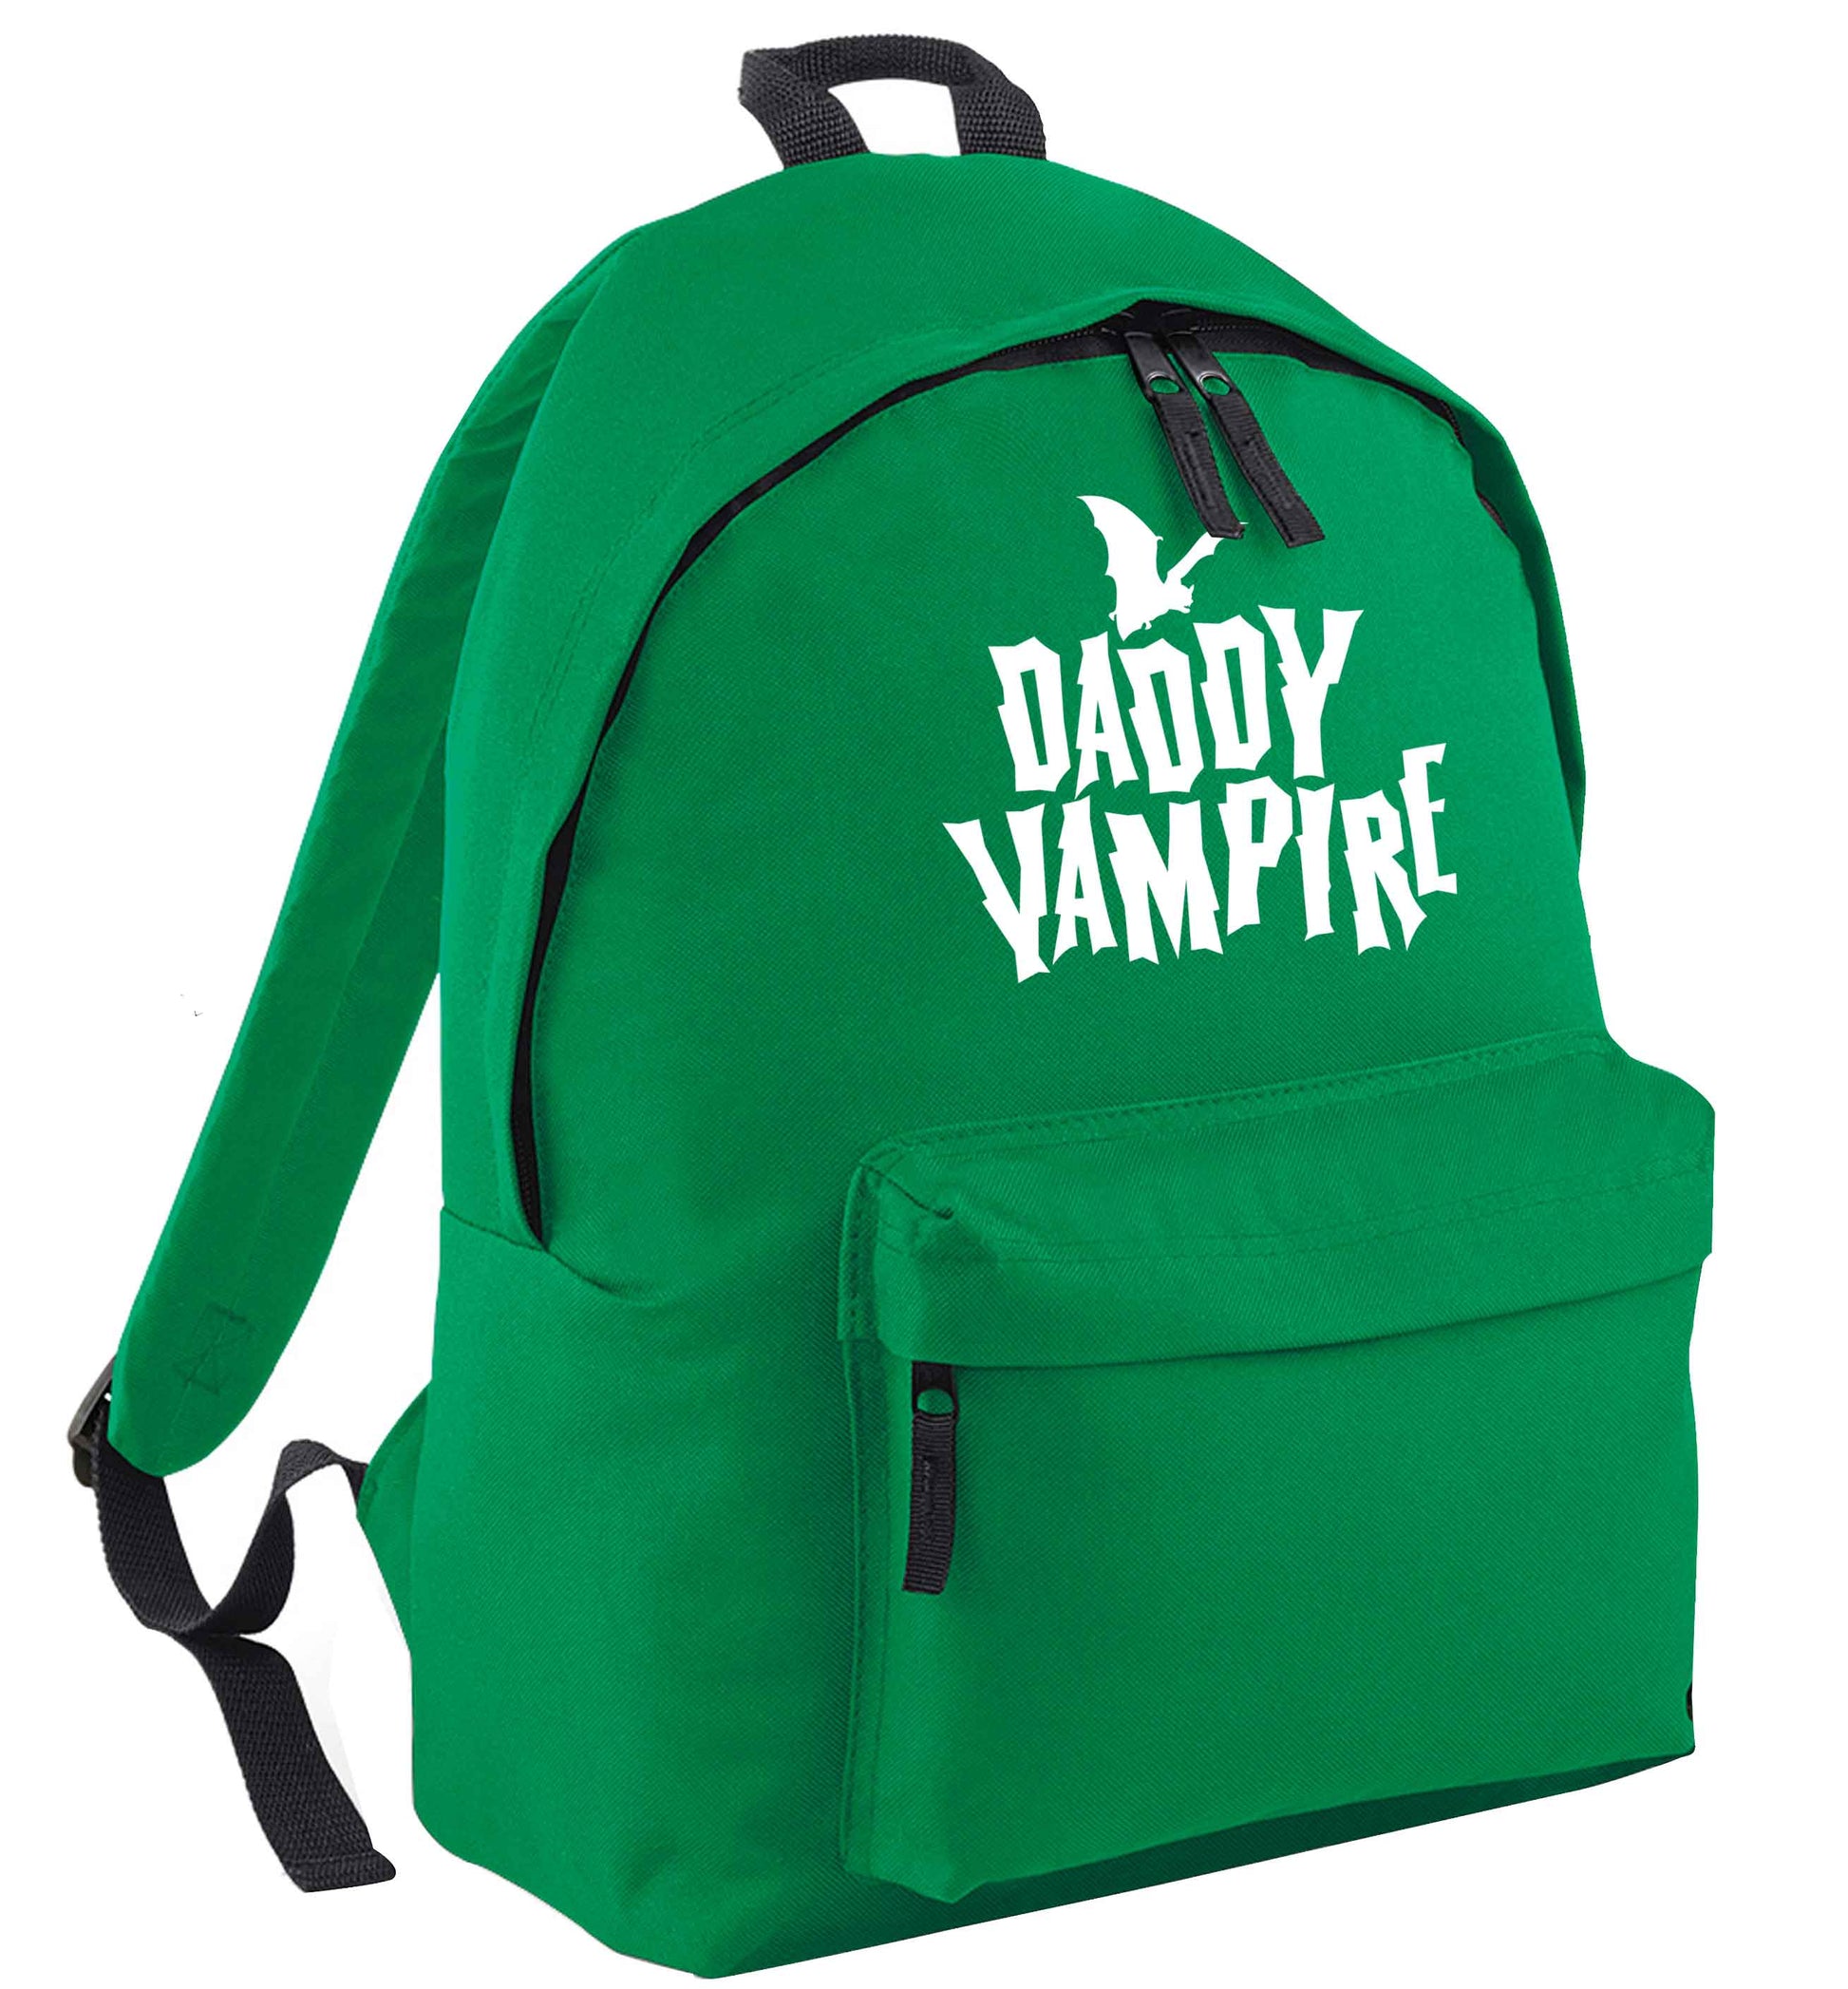 Daddy vampire green adults backpack